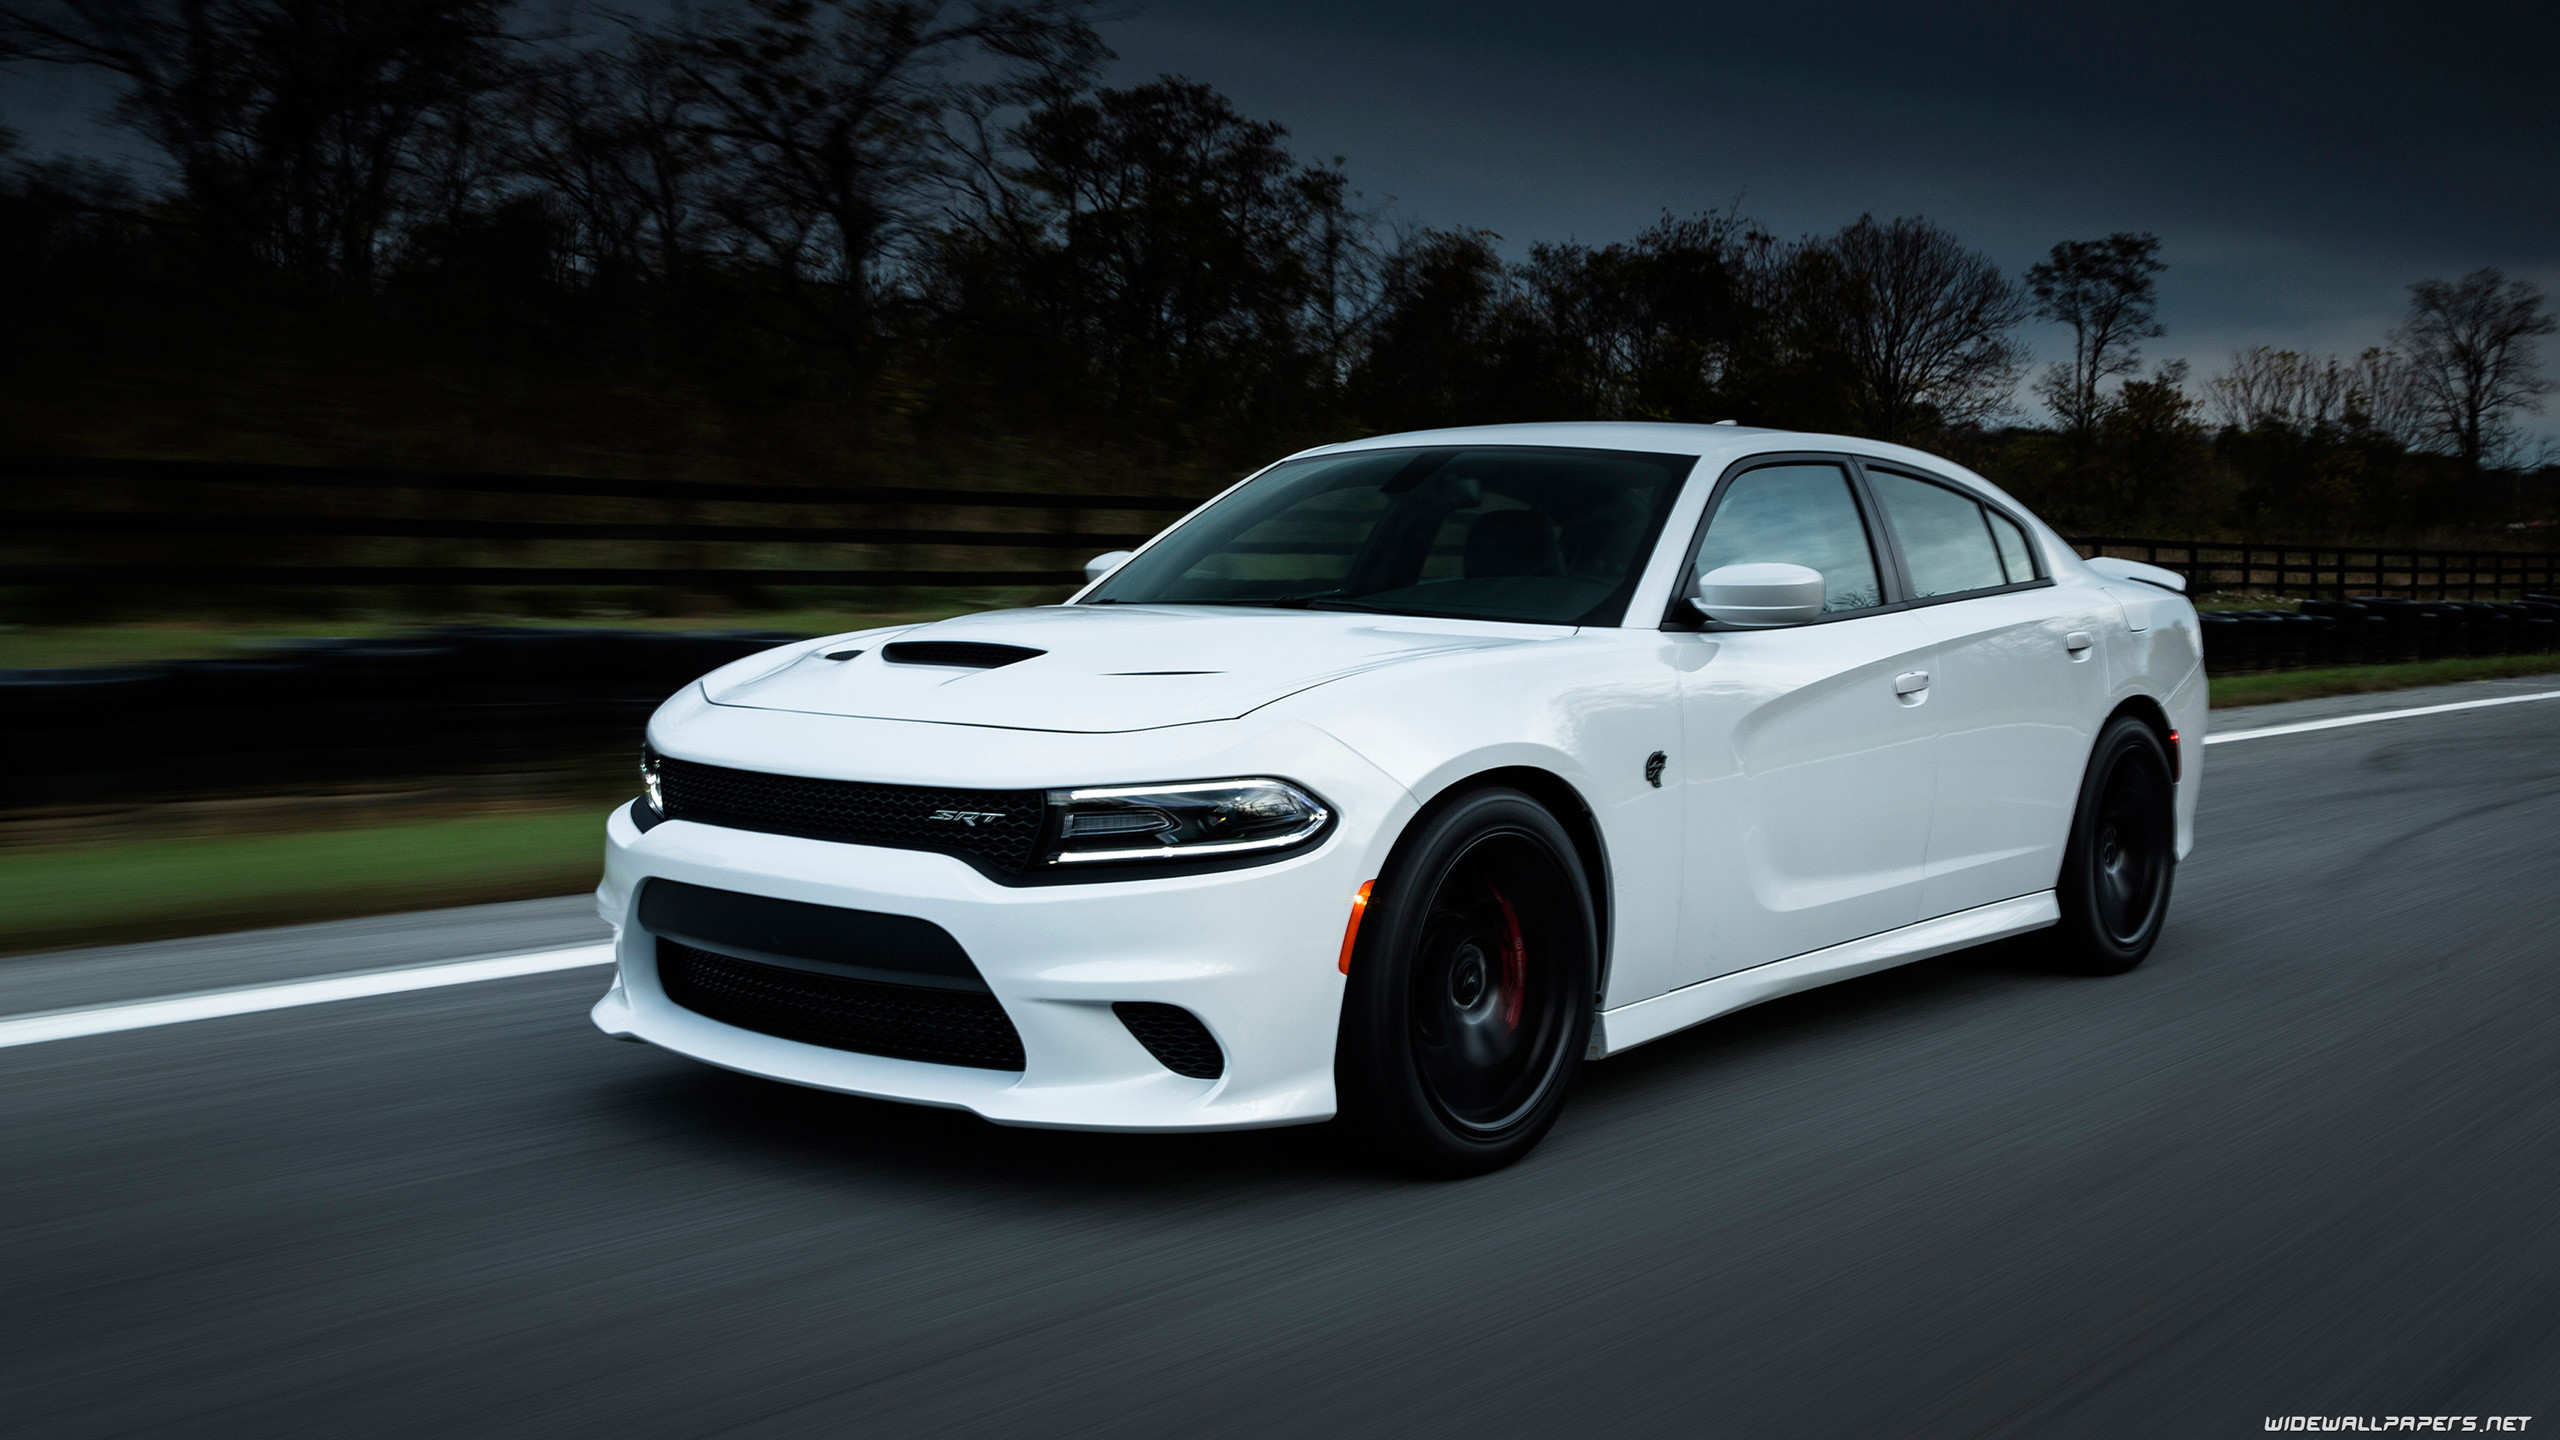 2560x1440 dodge charger wallpaper Dodge Charger cars desktop wallpapers 4K Ultra HD -  Page 3